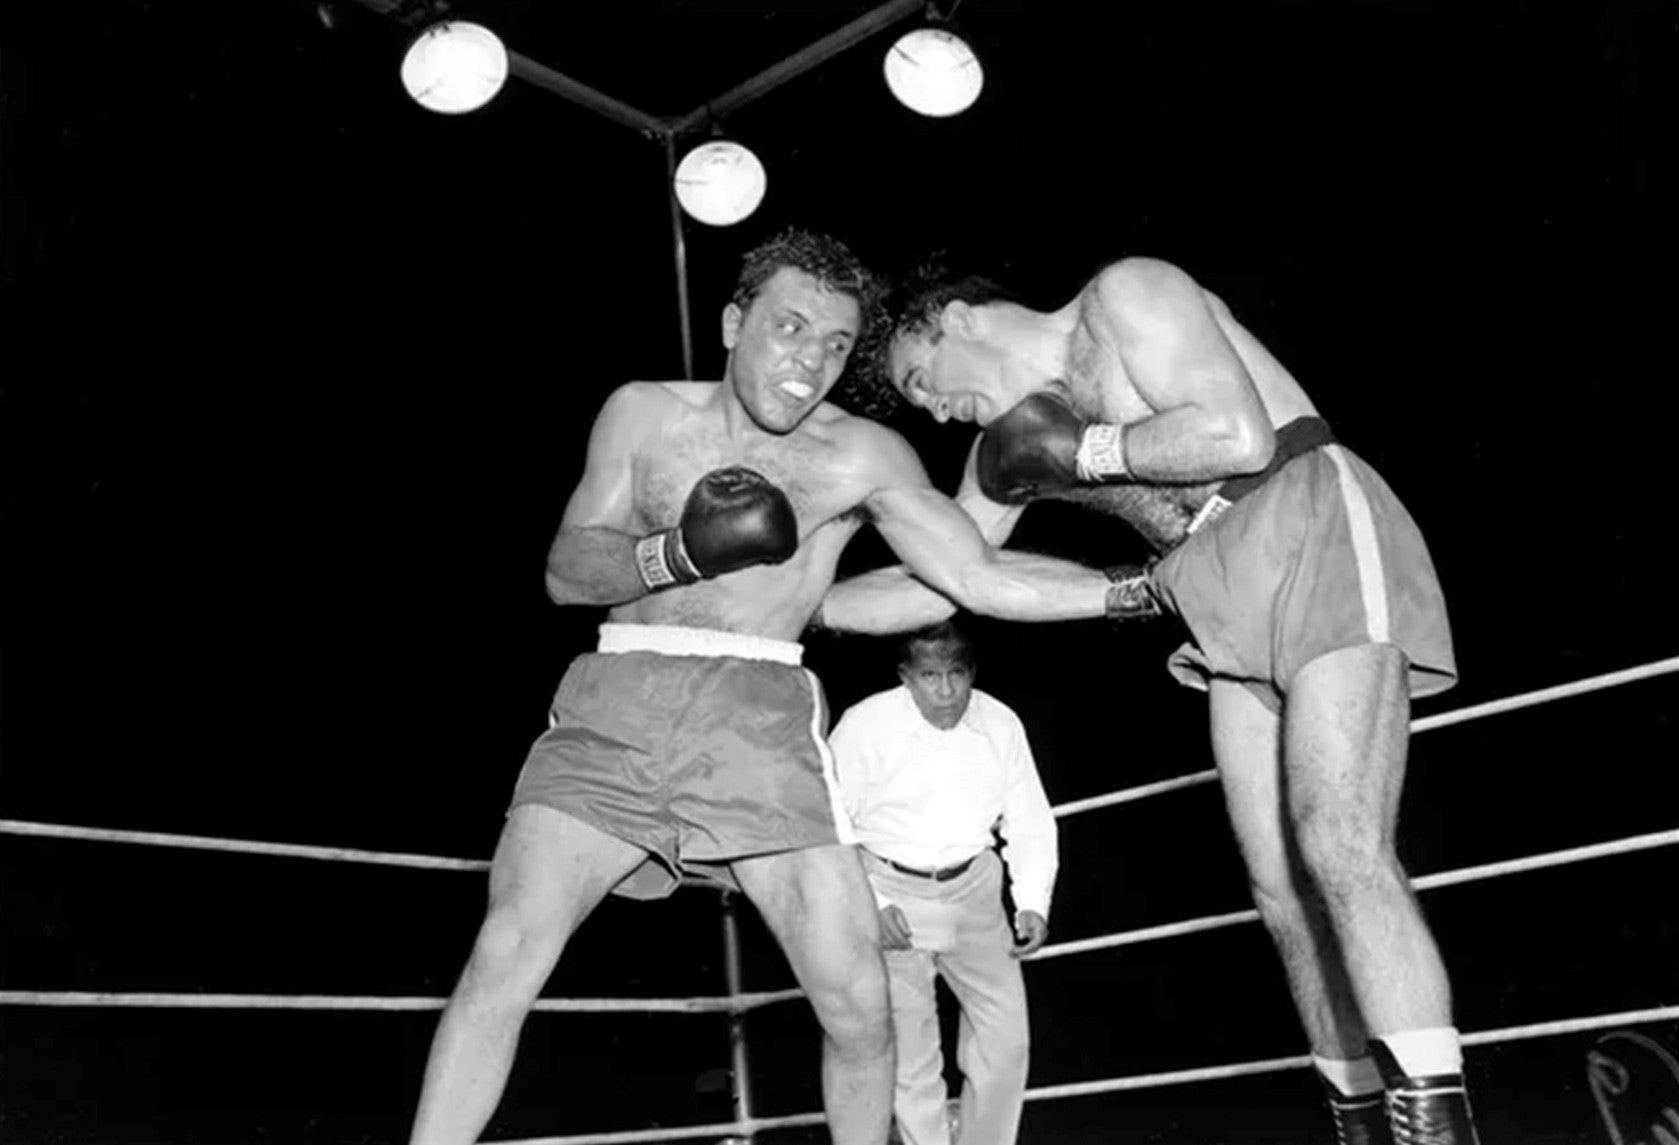 The Mafia's Grip on Boxing: Jake LaMotta's Fight for Redemption